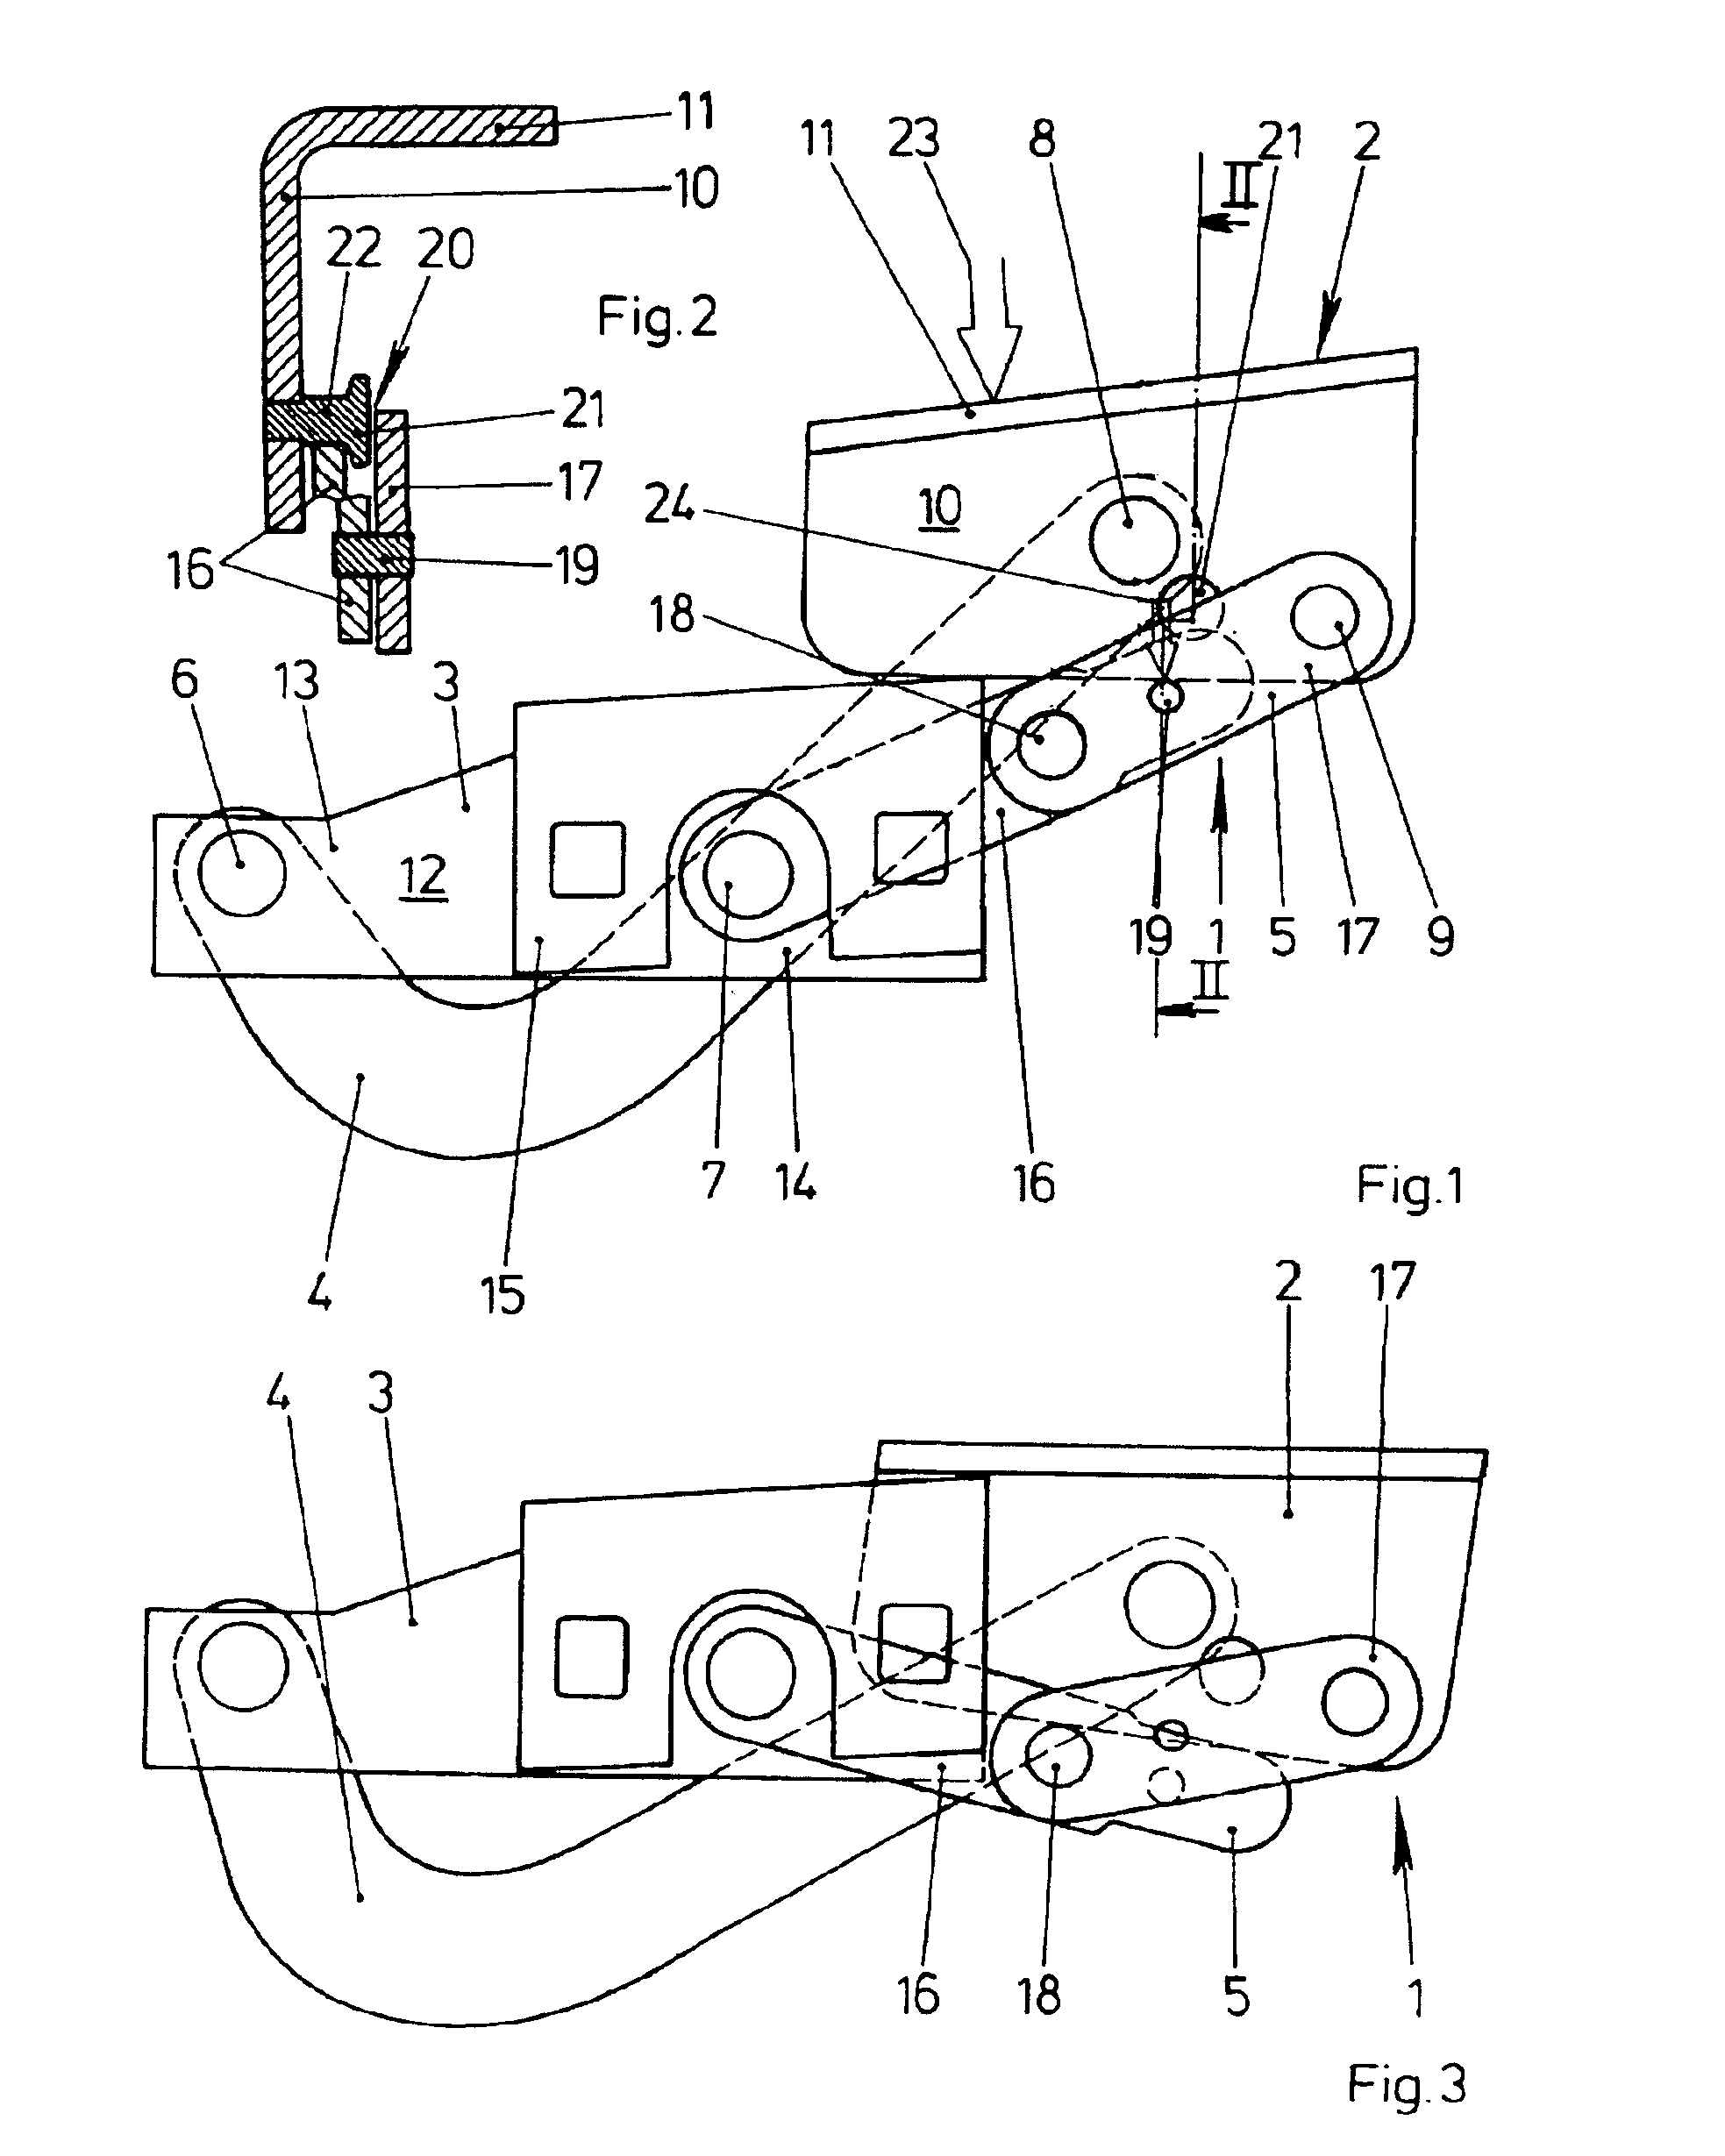 Dual-arm articulated hinge for the front bonnet of a motor vehicle